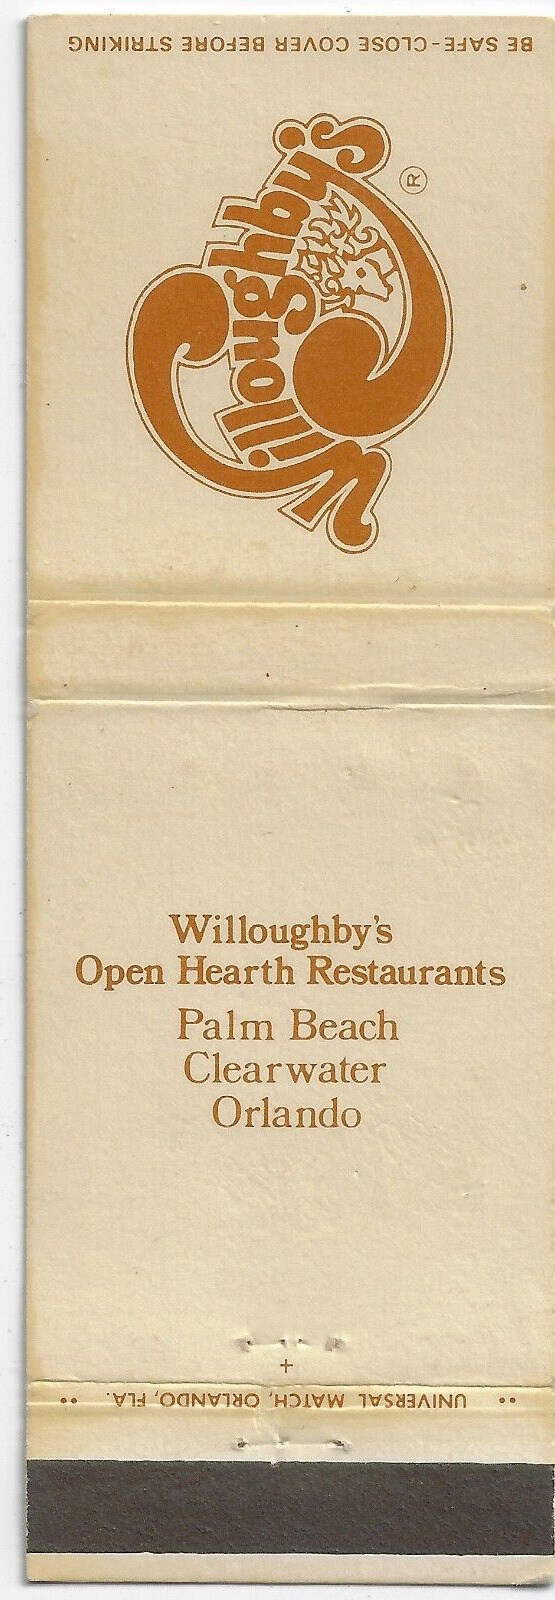 Willoughby's Open Hearth Restaurants Palm Beach Florida FS Empty Matchbook Cover